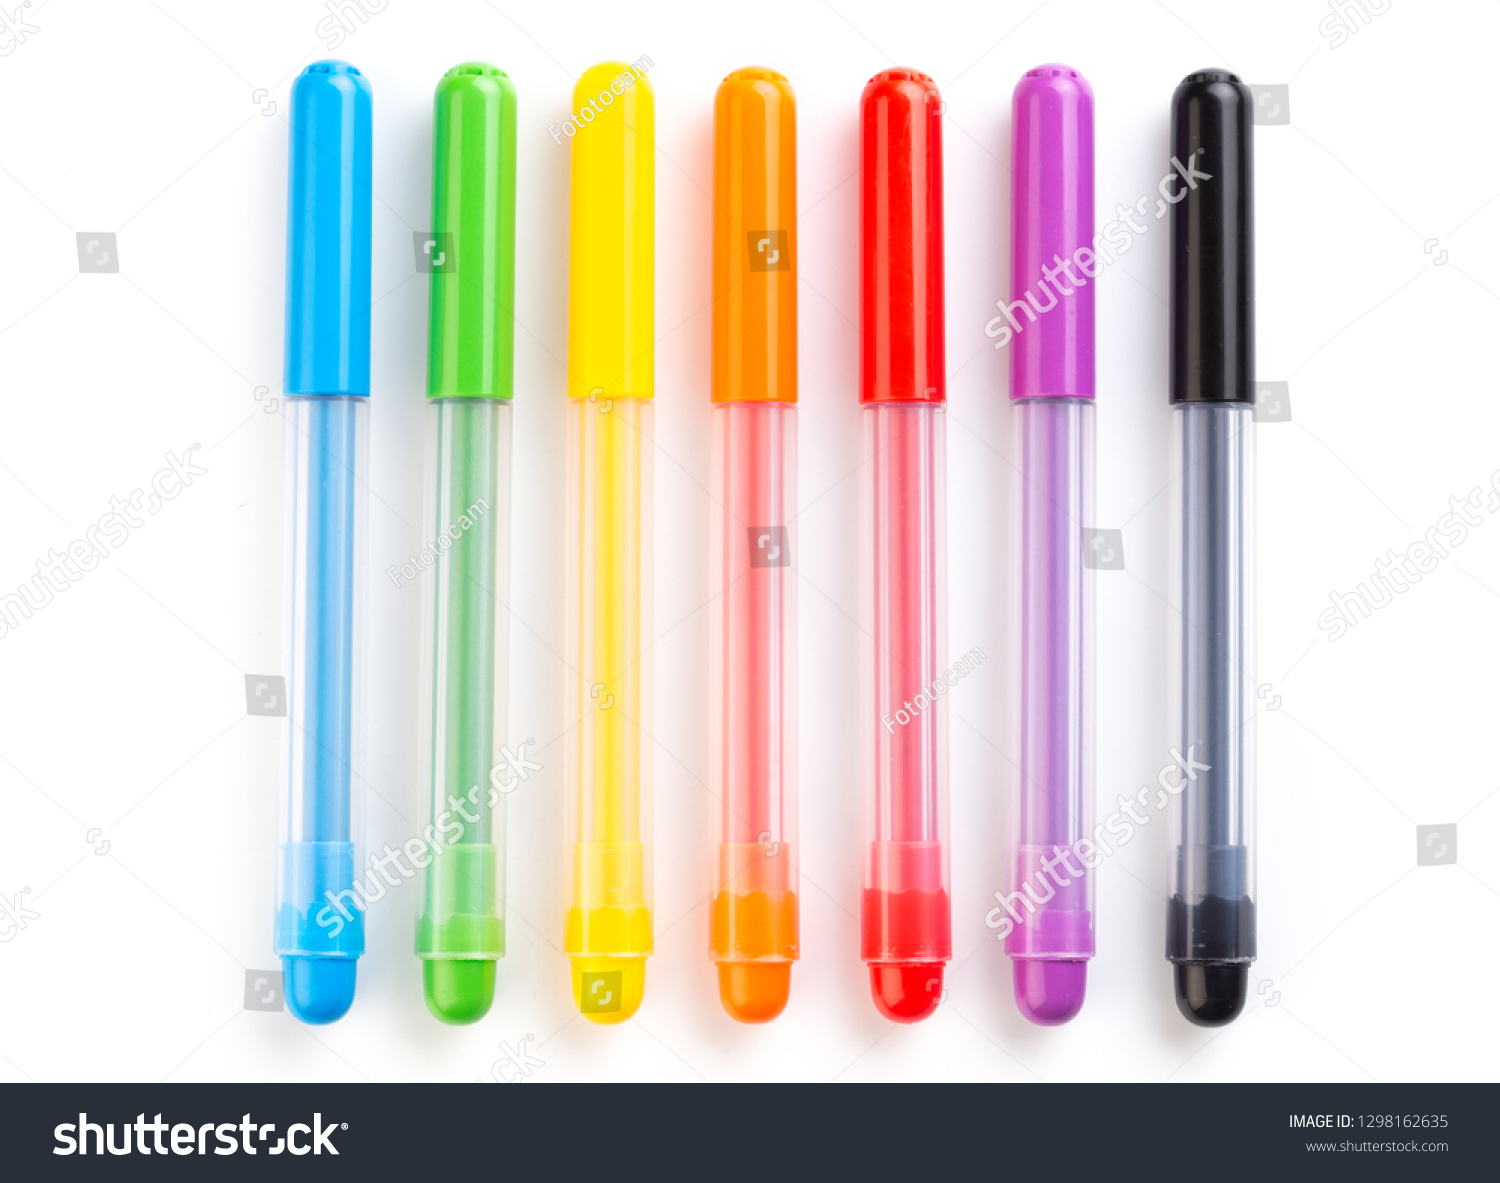 Colorful marker pen set on isolated background with clipping path. Vivid highlighter and blank space for your design or montage. - Image #1298162635